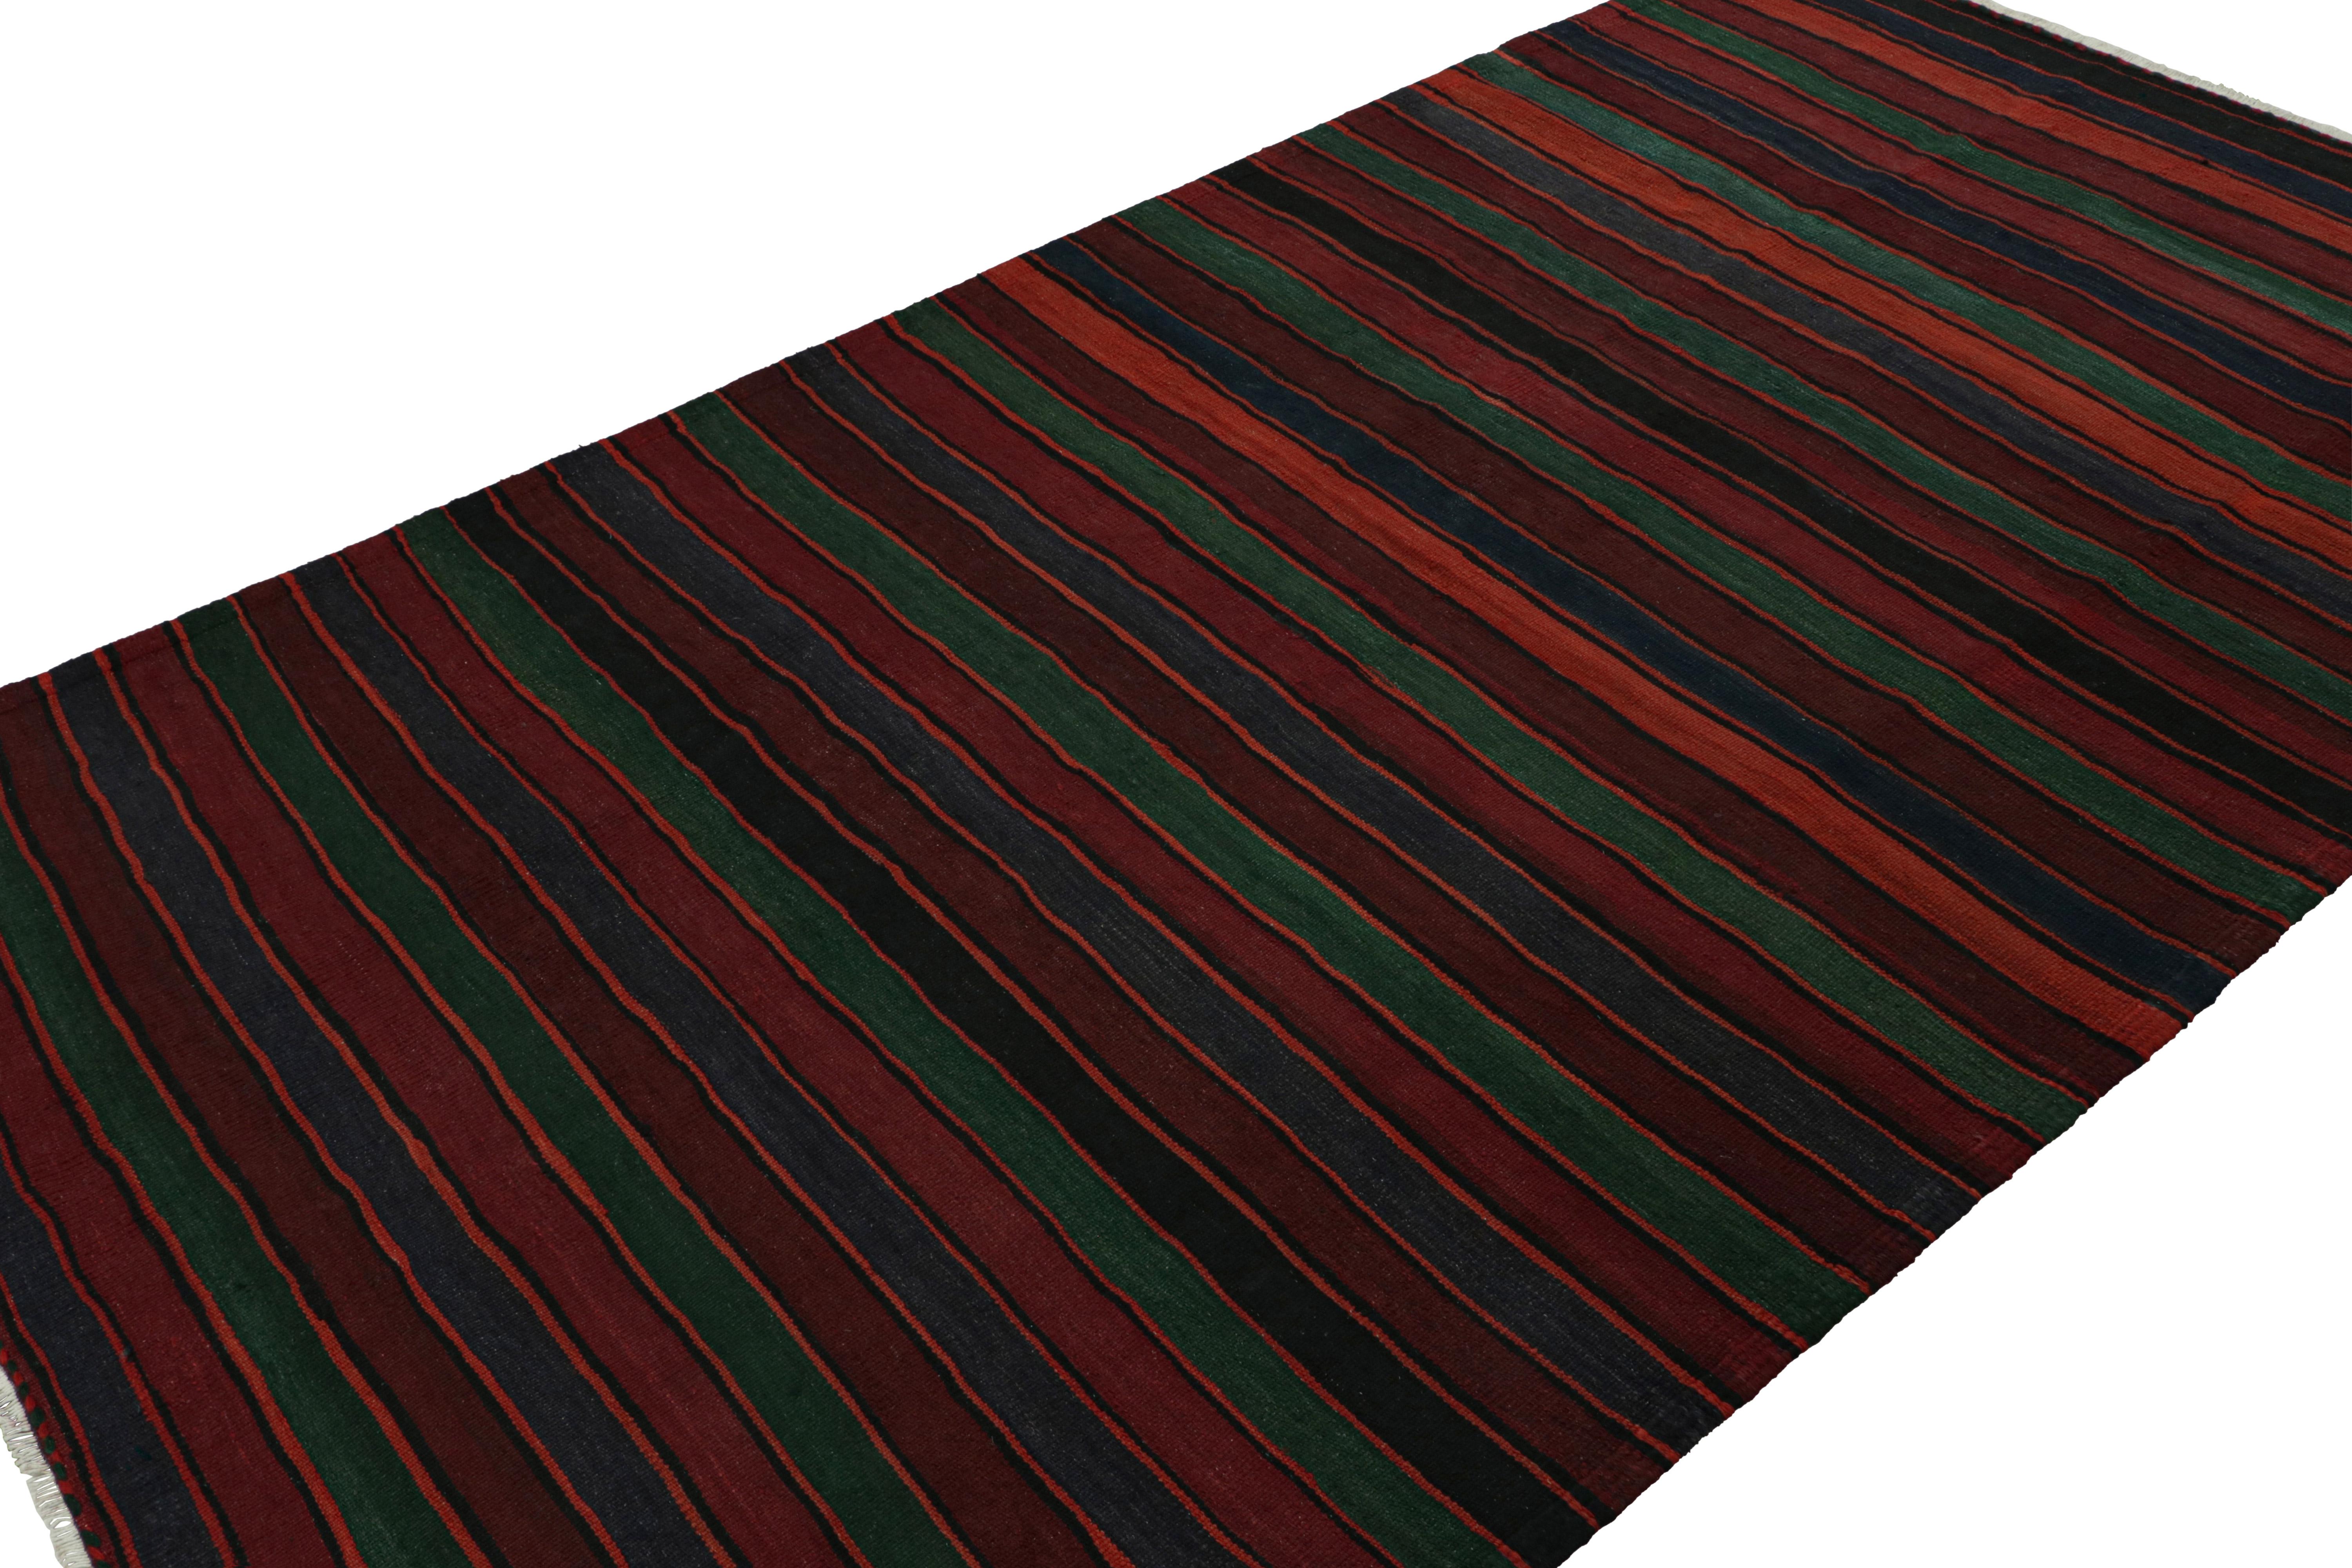 Handwoven in wool, circa 1950-1960, this 5x9 vintage Afghan tribal kilim rug in Burgundy, is an exciting new curation in the Rug & Kilim collection. 

On the Design: 

Keen eyes for detail will admire the striped pattern of the rug, which is